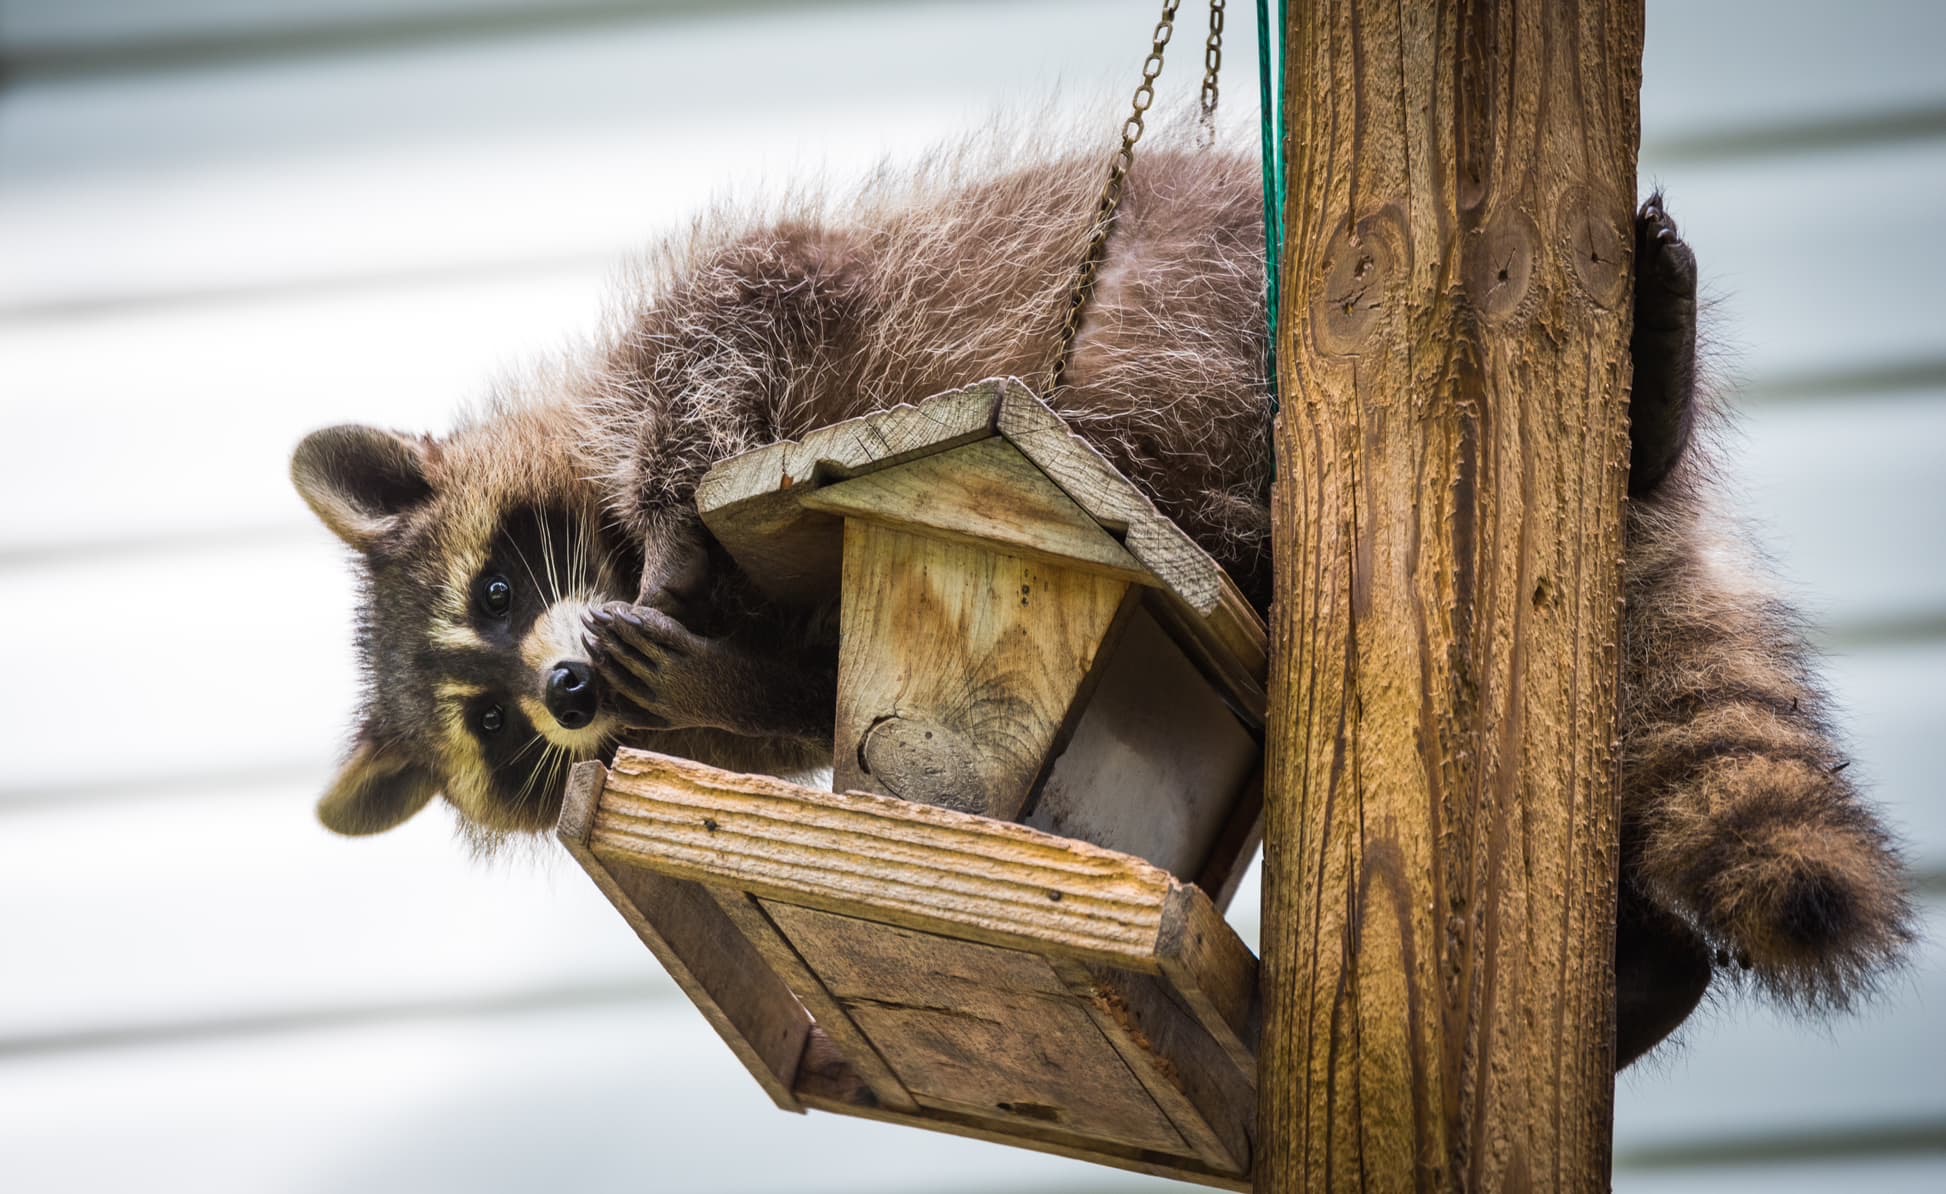 How To Know If There's A Racoon In The Attic